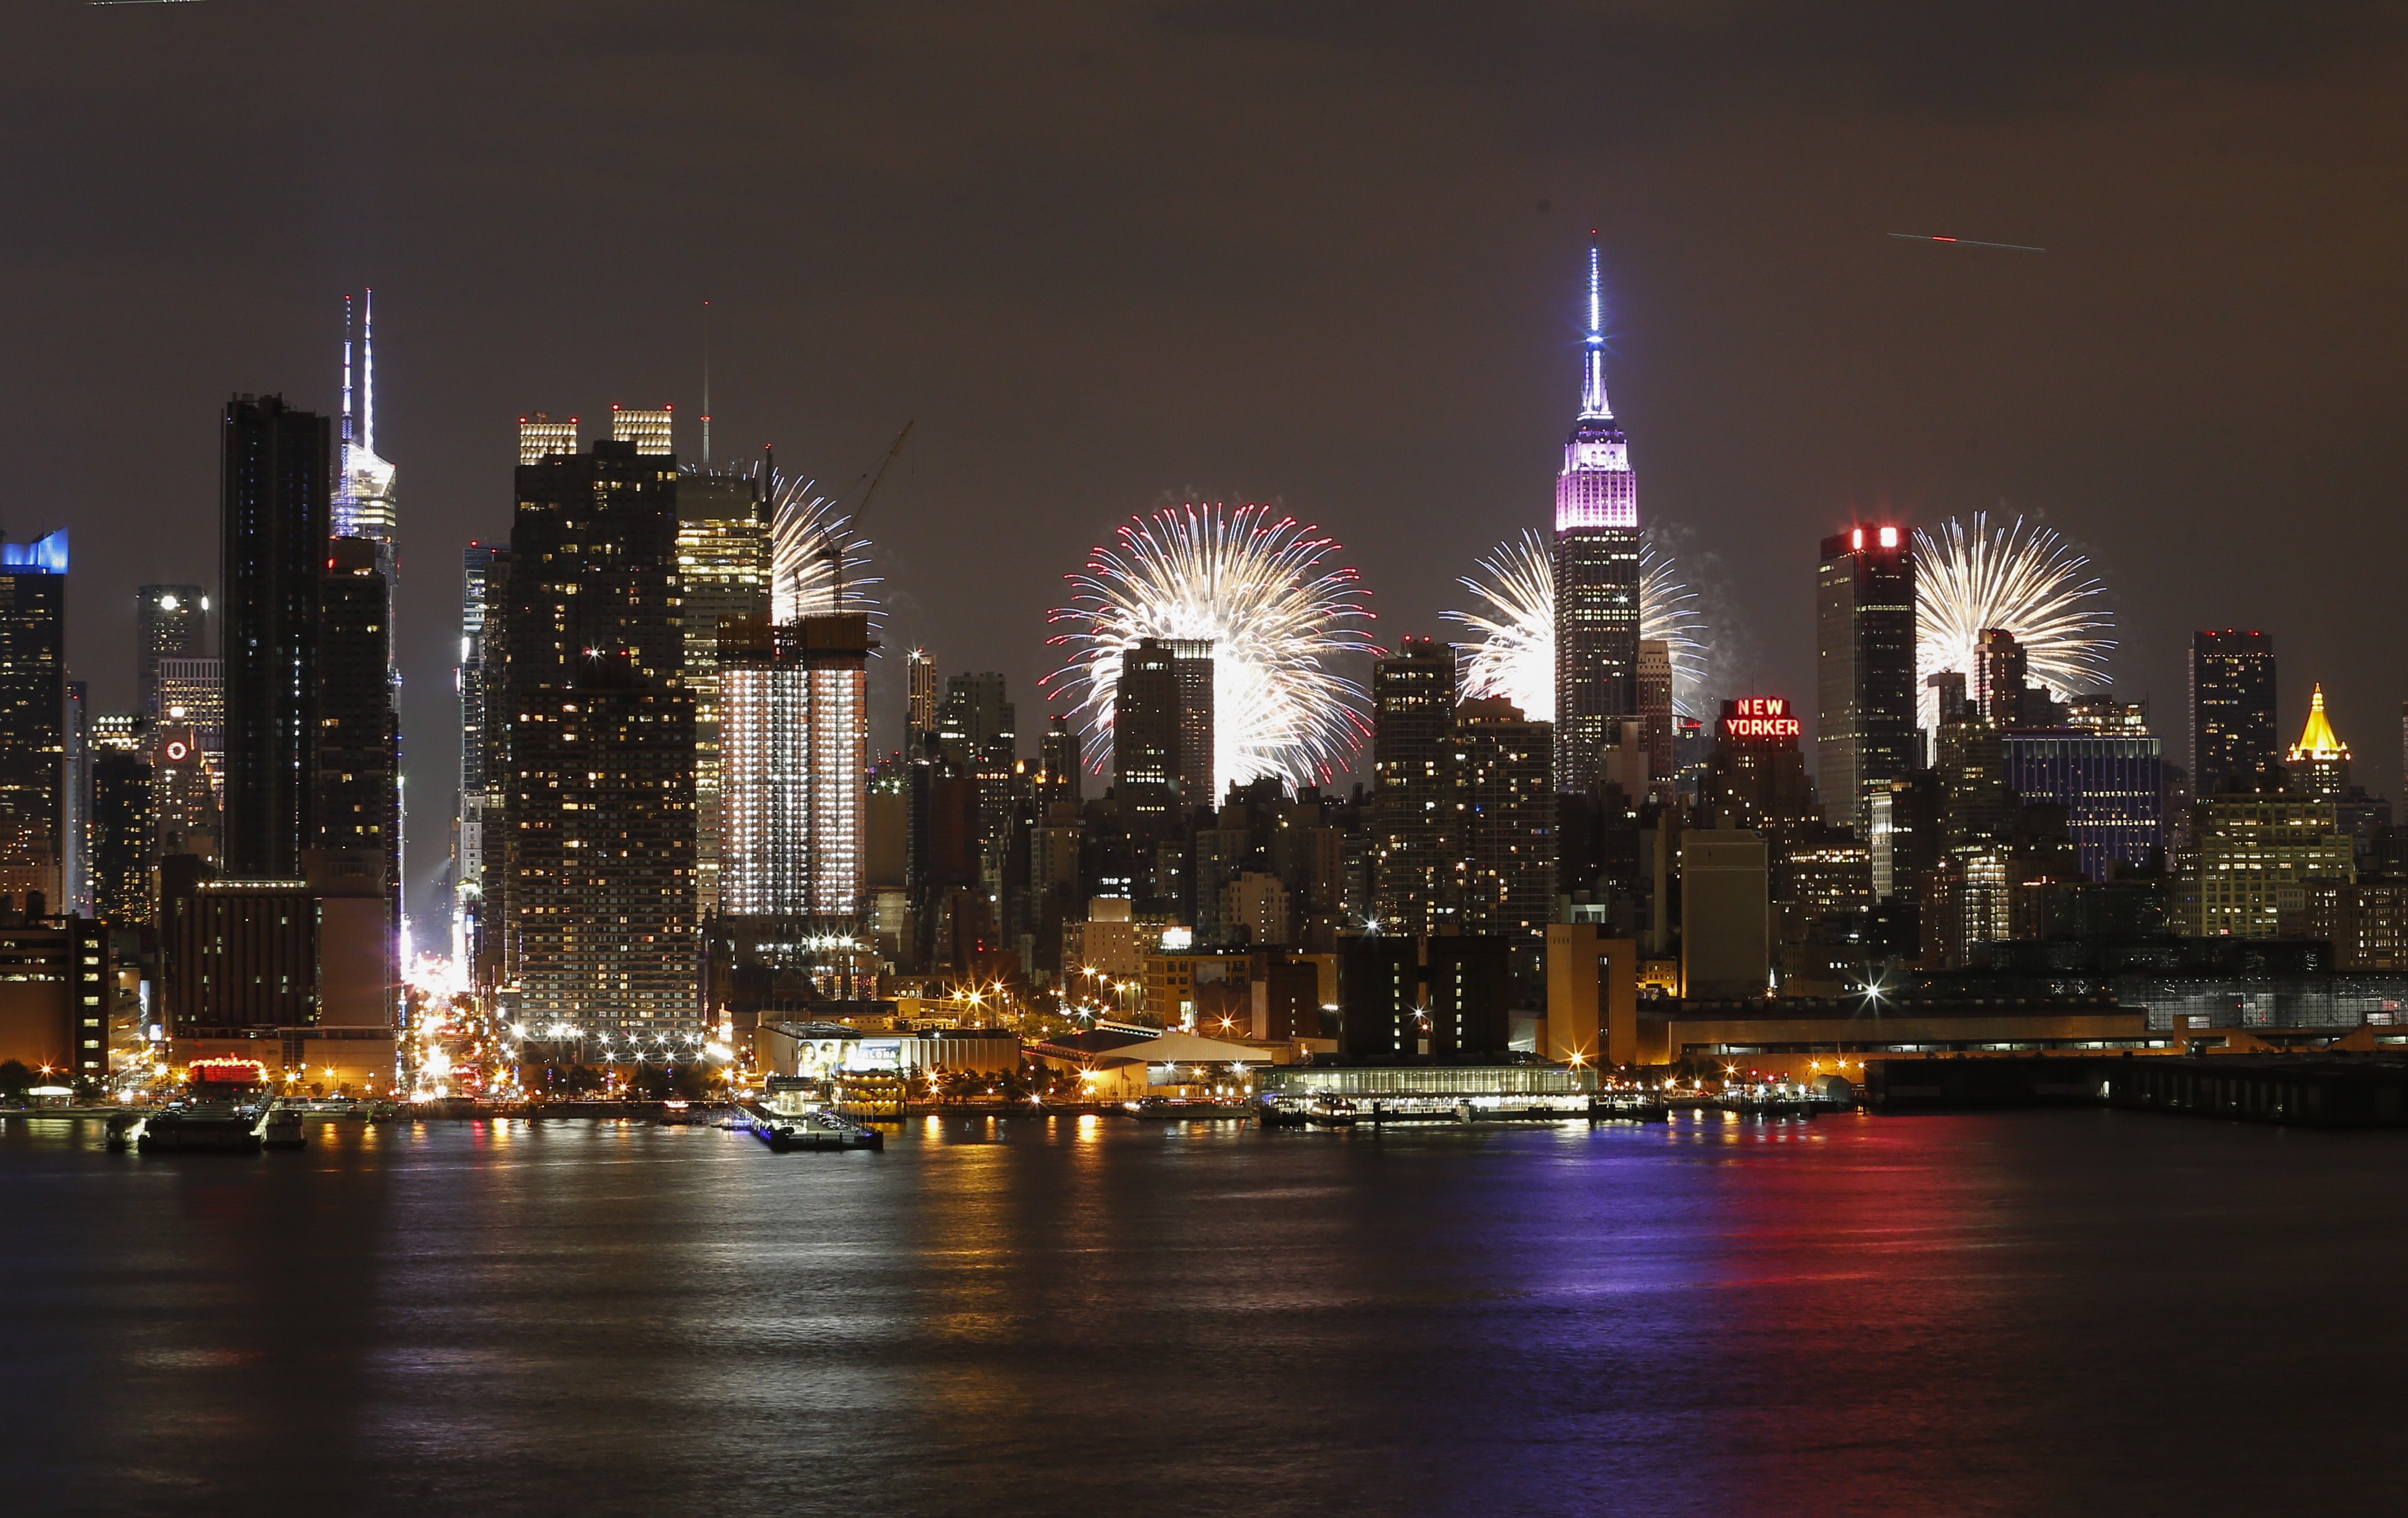 Fireworks light up the New York City skyline during 39th annual Macy's 4th of July fireworks for Independence day as seen from Weehawken, N.J., on July 4, 2015 . (Credit: Kena Betancur/ AFP/Getty Images)